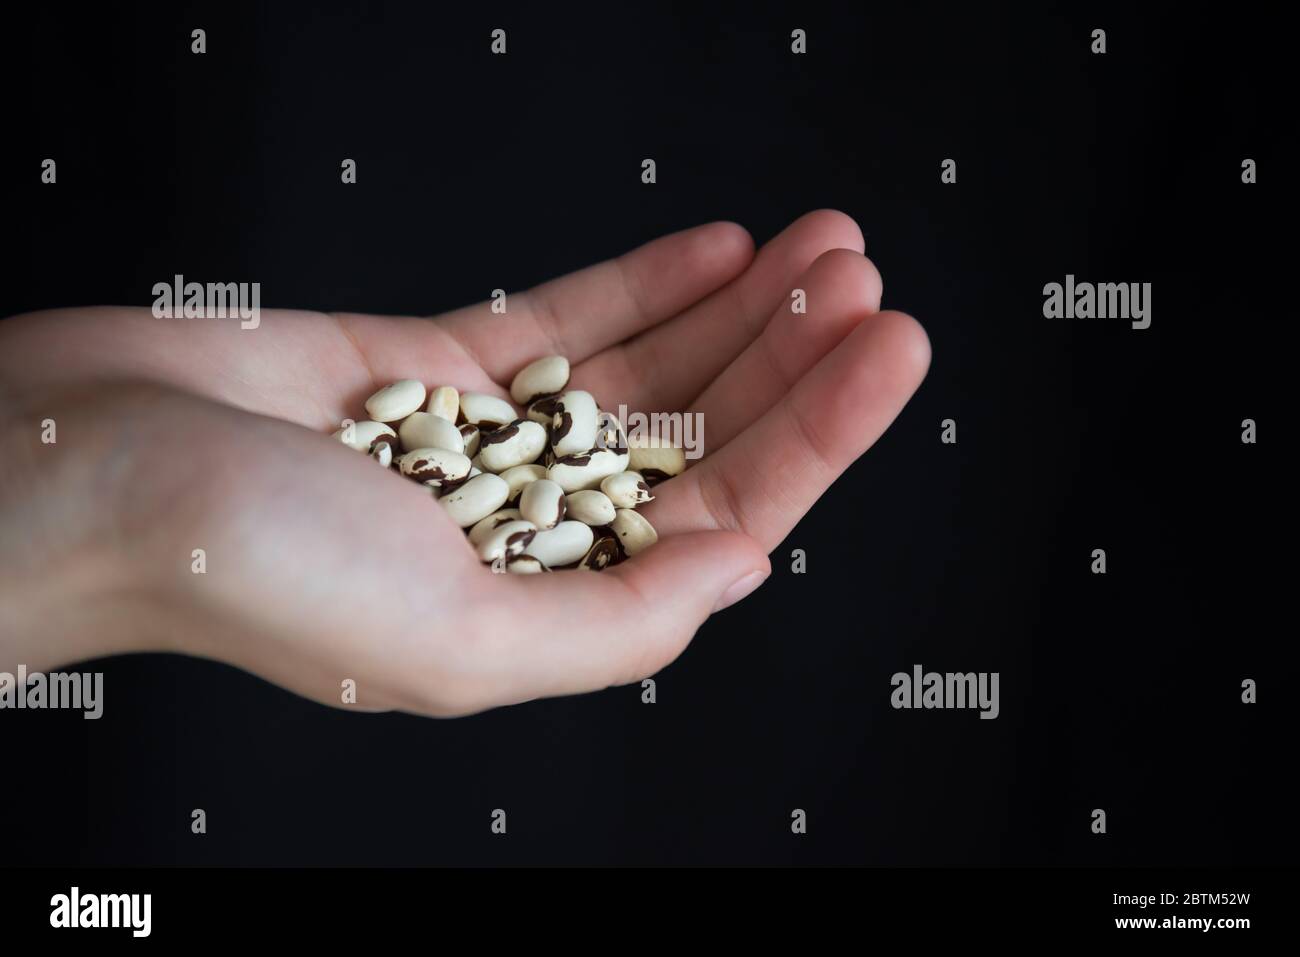 Woman's hand holding yellow wax bean garden seeds with black background and copy space Stock Photo